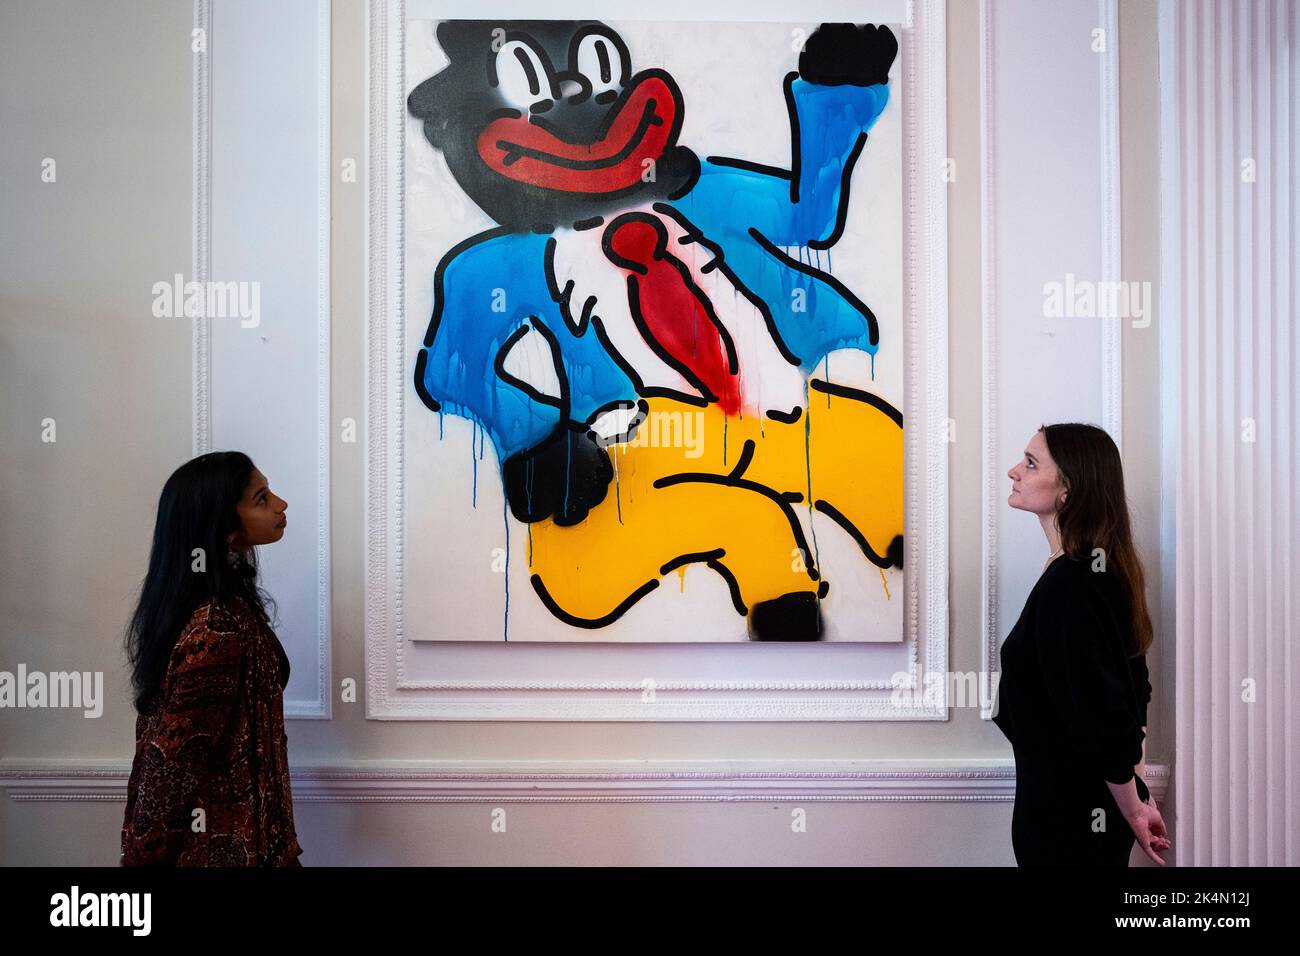 London, UK.  3 October 2022. 'Jonny Just Come', 2022, by Slawn. Preview of 'On A Darker Note' an exhibition featuring works by Nigerian London-based artist Slawn at the Arab British Chamber of Commerce in Mayfair.  The new works focus on clowns responding to the blackface minstrel caricatures produced during the era of the Jim Crow laws of racial segregation in the US in the late 19th and early 20th centuries. Credit: Stephen Chung / Alamy Live News Stock Photo